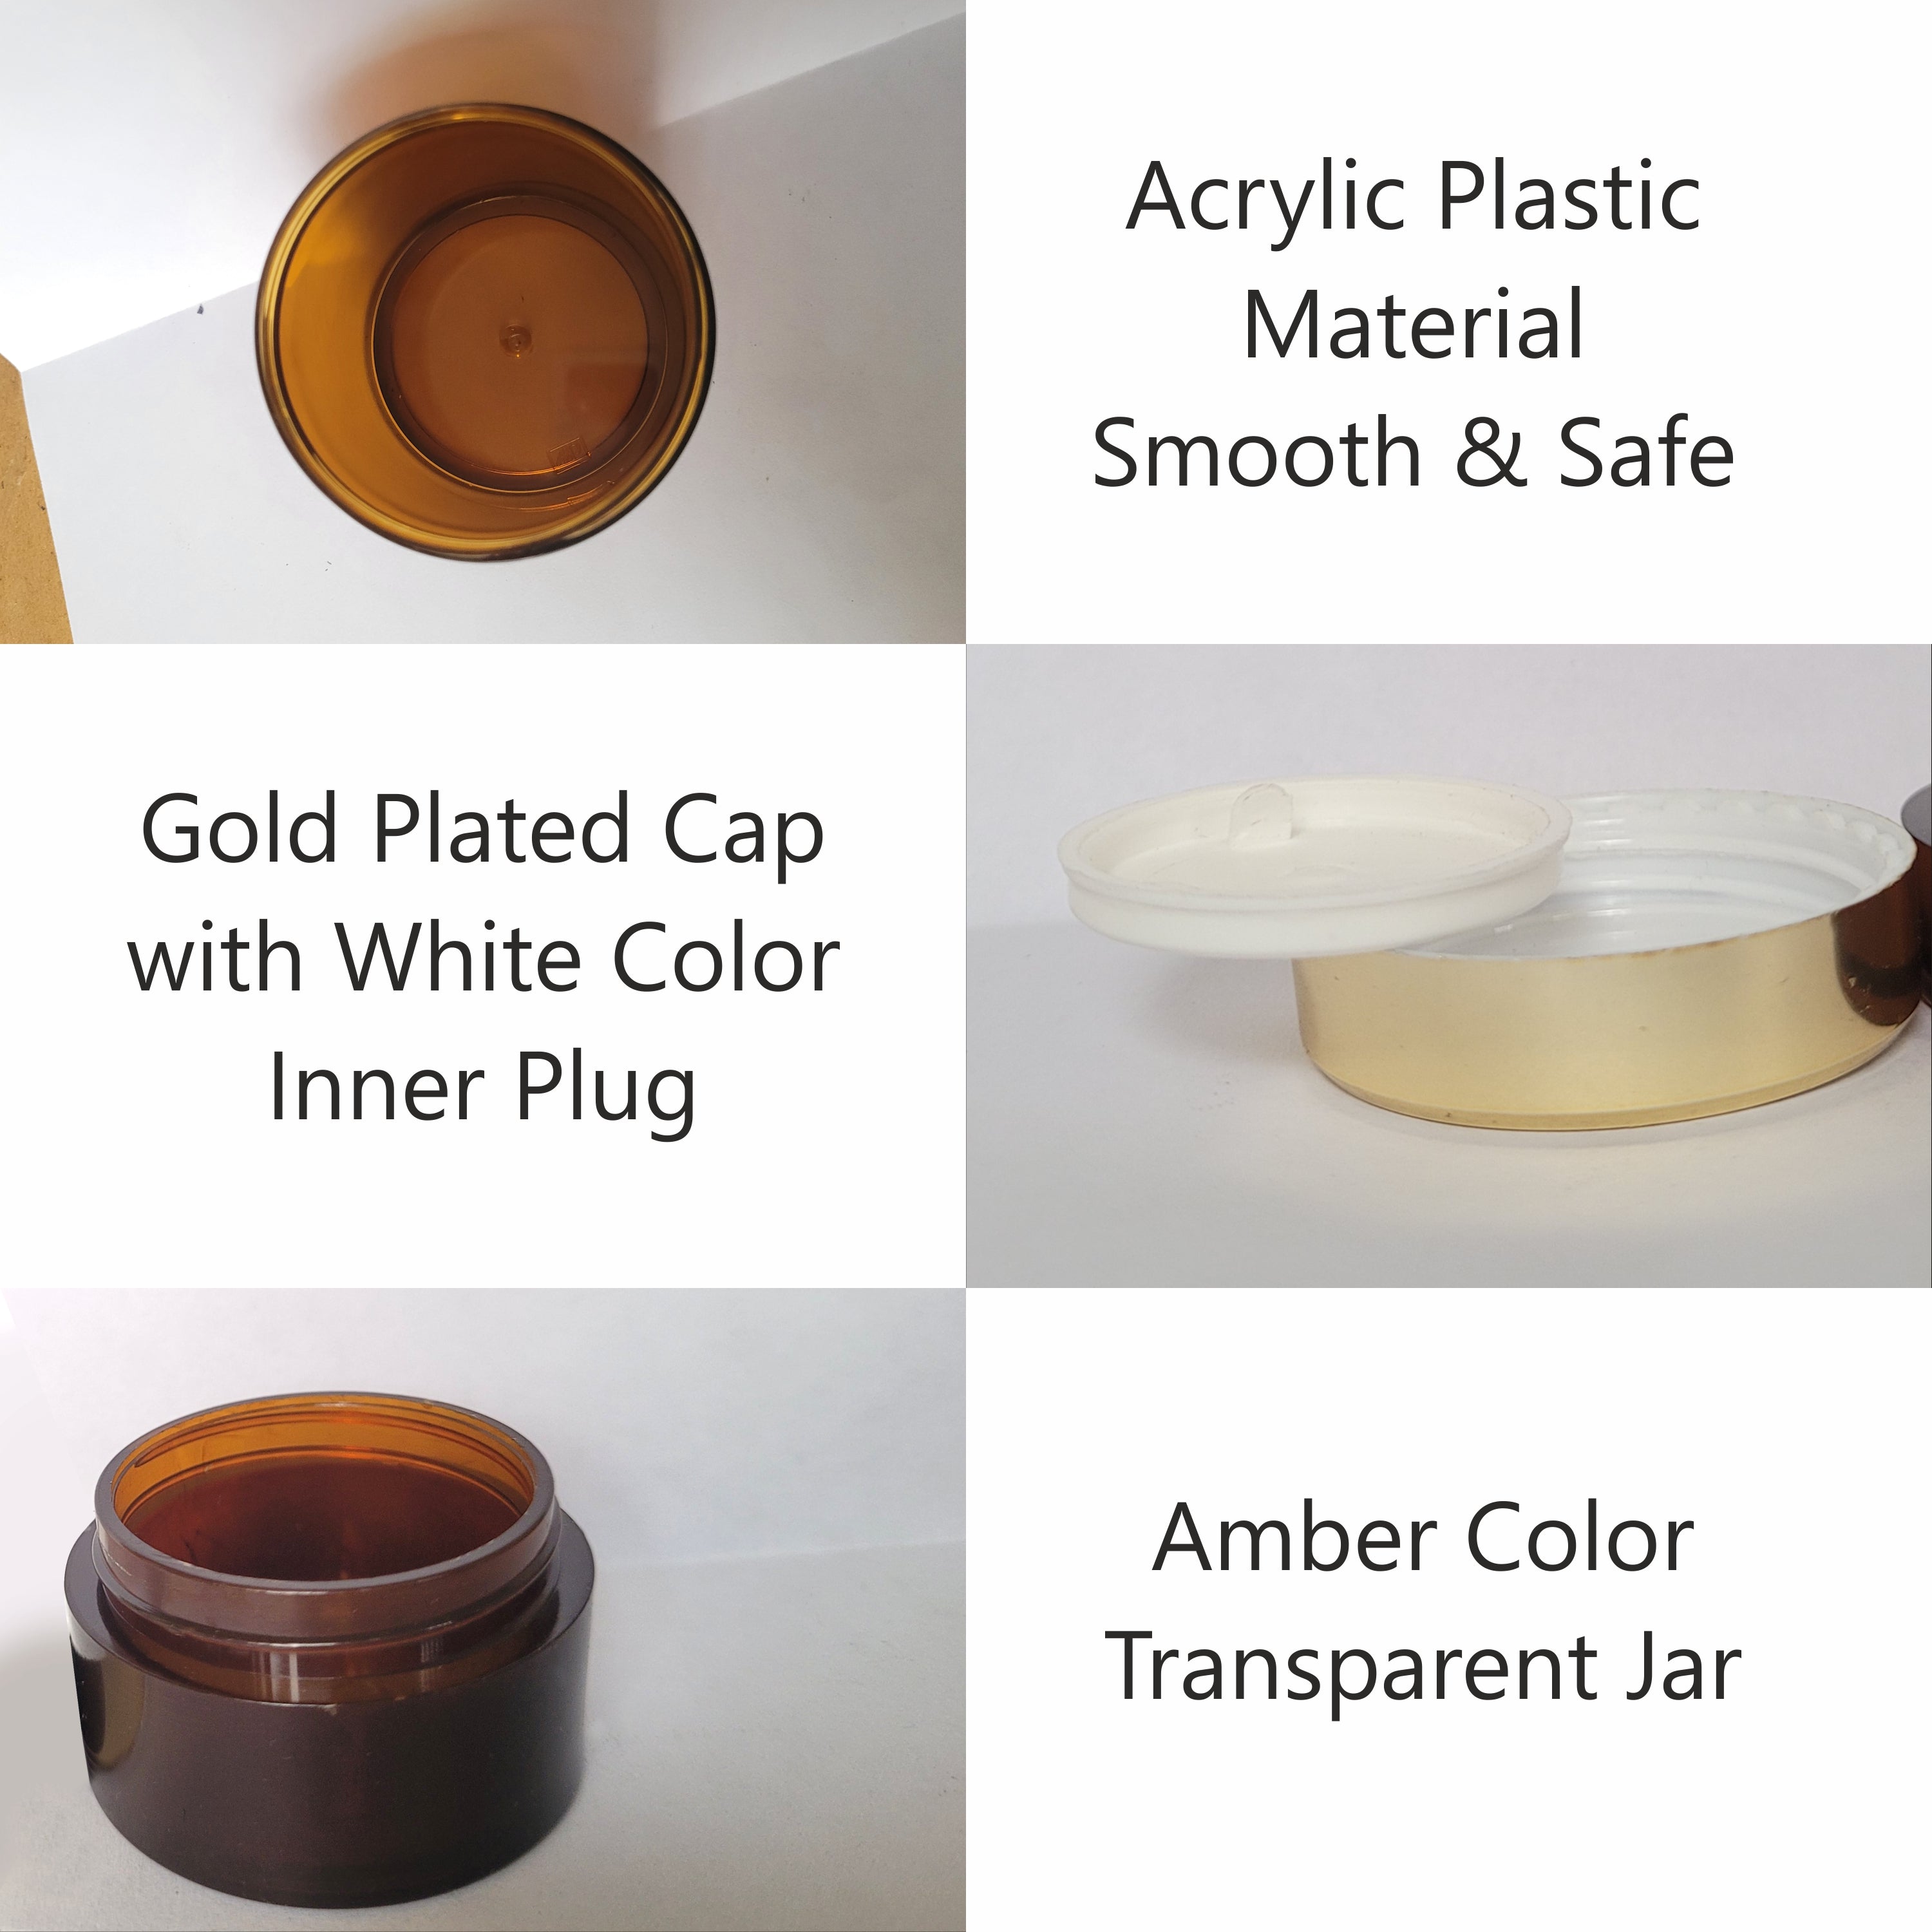 Zenvista, Zenvista packaging,cosmetic packaging, empty cosmetic packaging, jars, empty jars, empty jars for packging, amber color jars, airtight jars, travel friendly jars, jars for cosmetics, cosmetic containers 